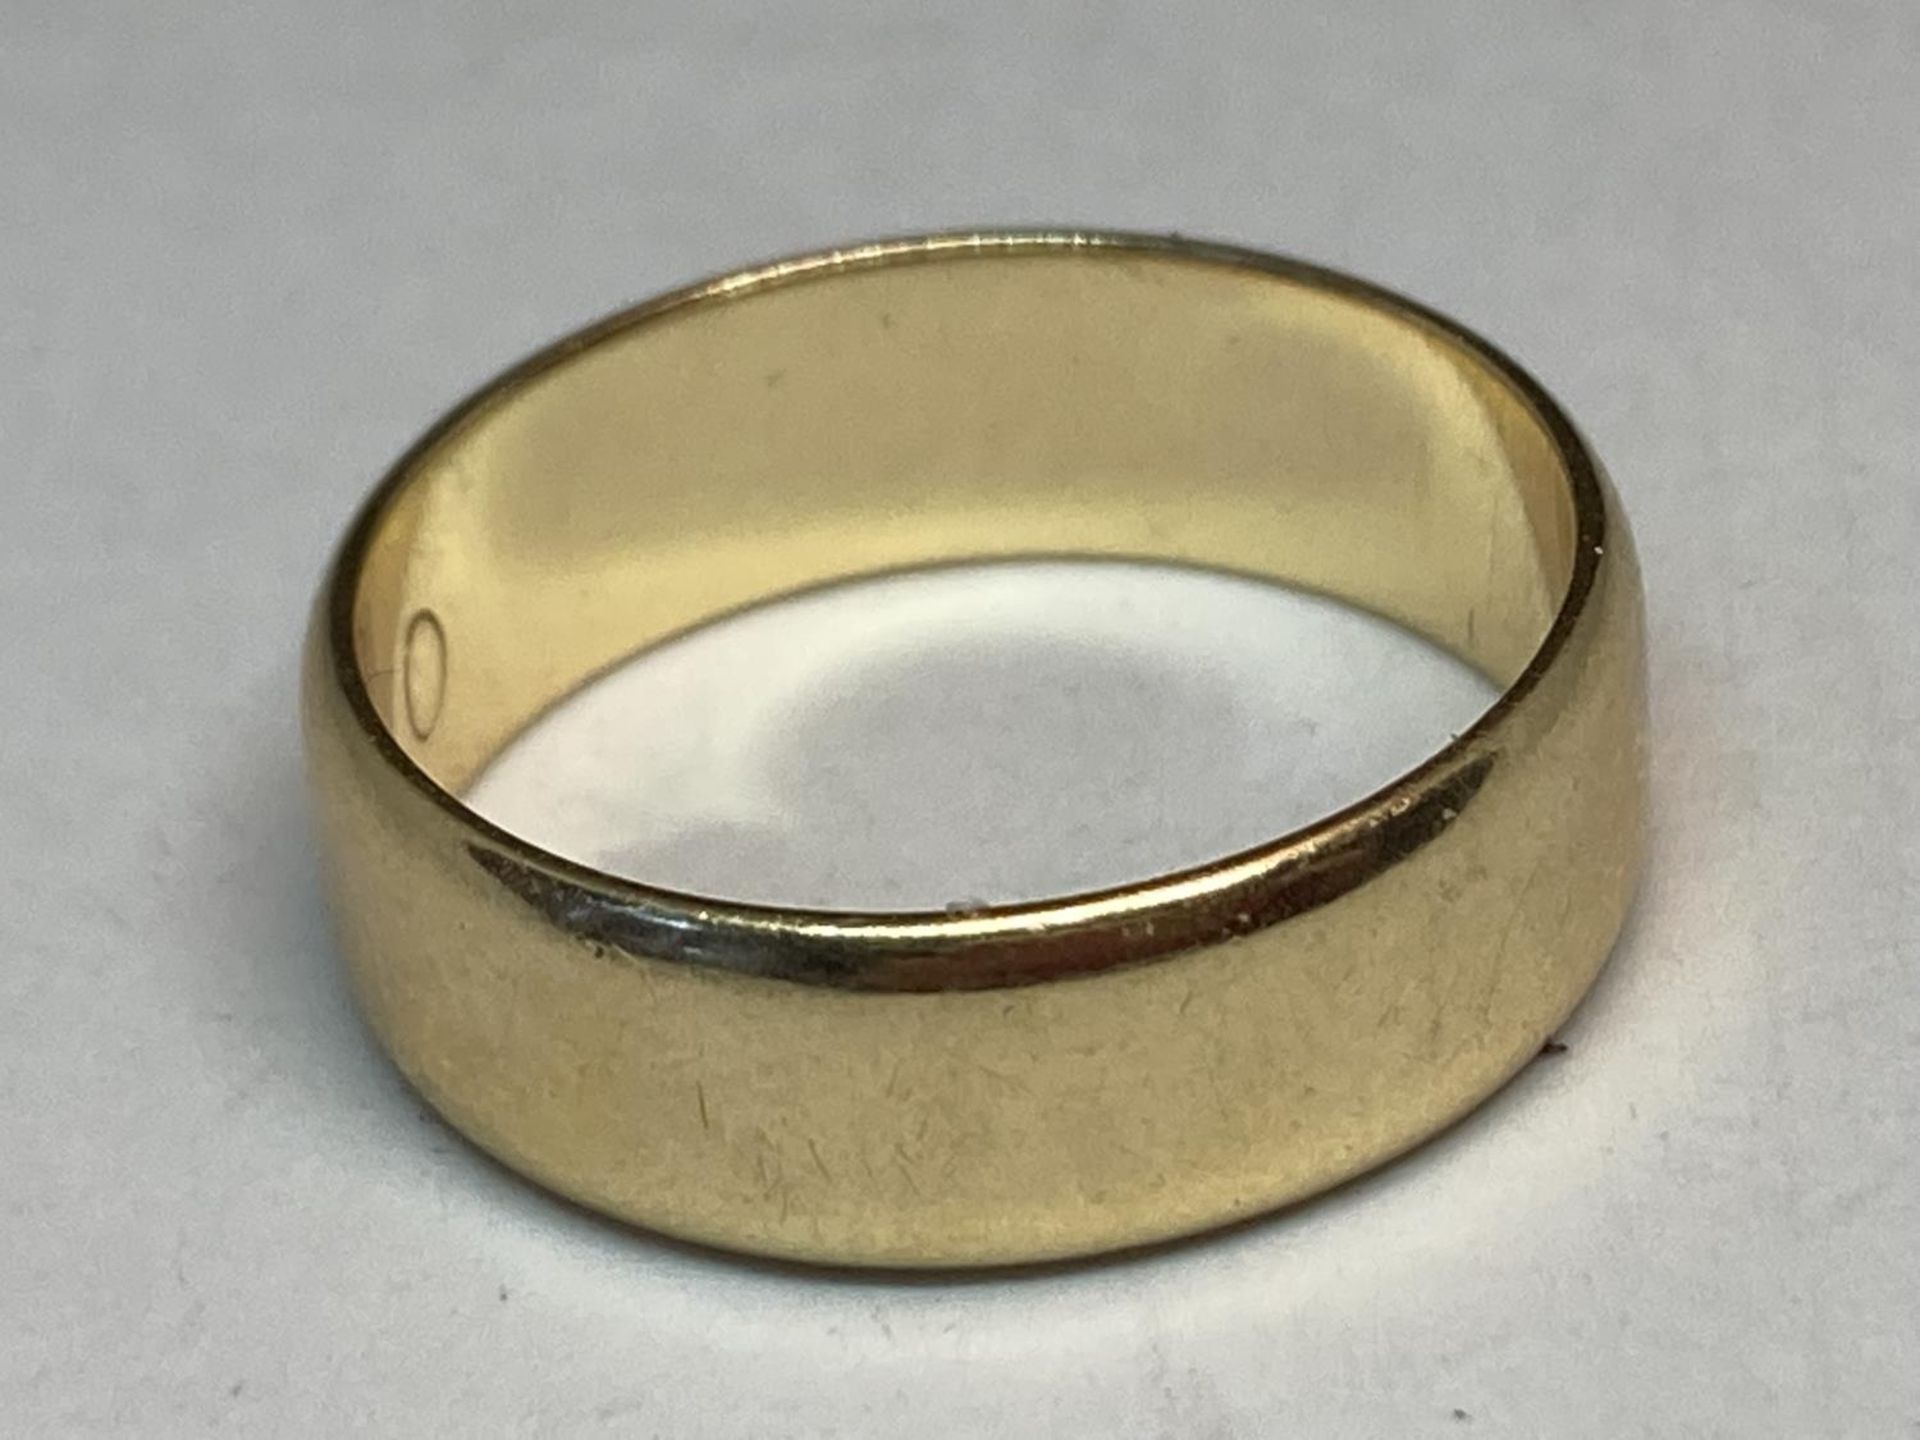 AN 18 CARAT YELLOW GOLD WEDDING BAND SIZE O GROSS WEIGHT 5.09 GRAMS - Image 2 of 6